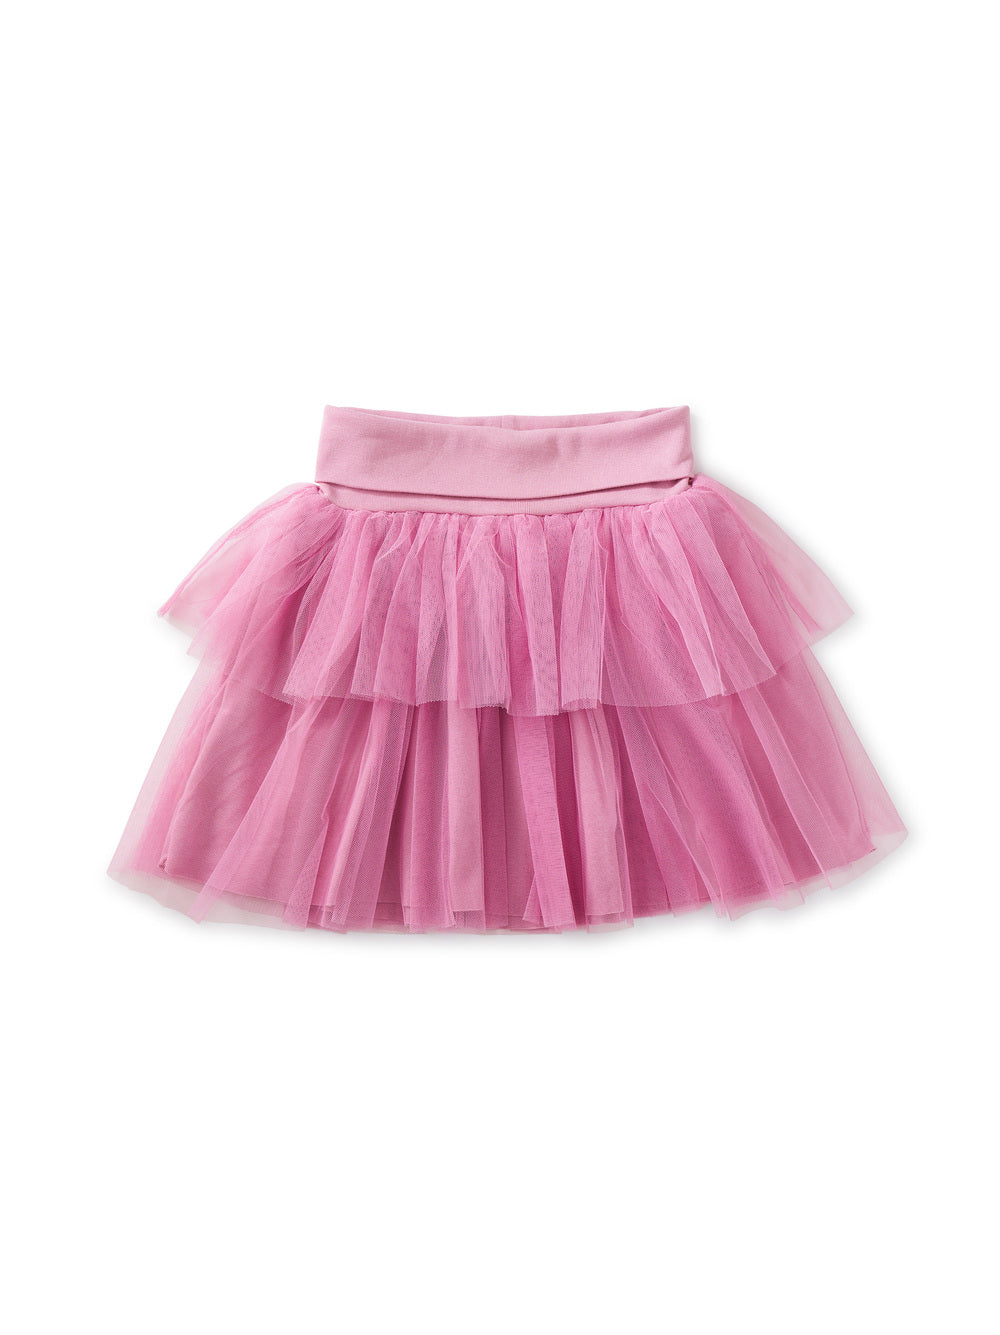 Tiered Tulle Skirt in Mauve Mist